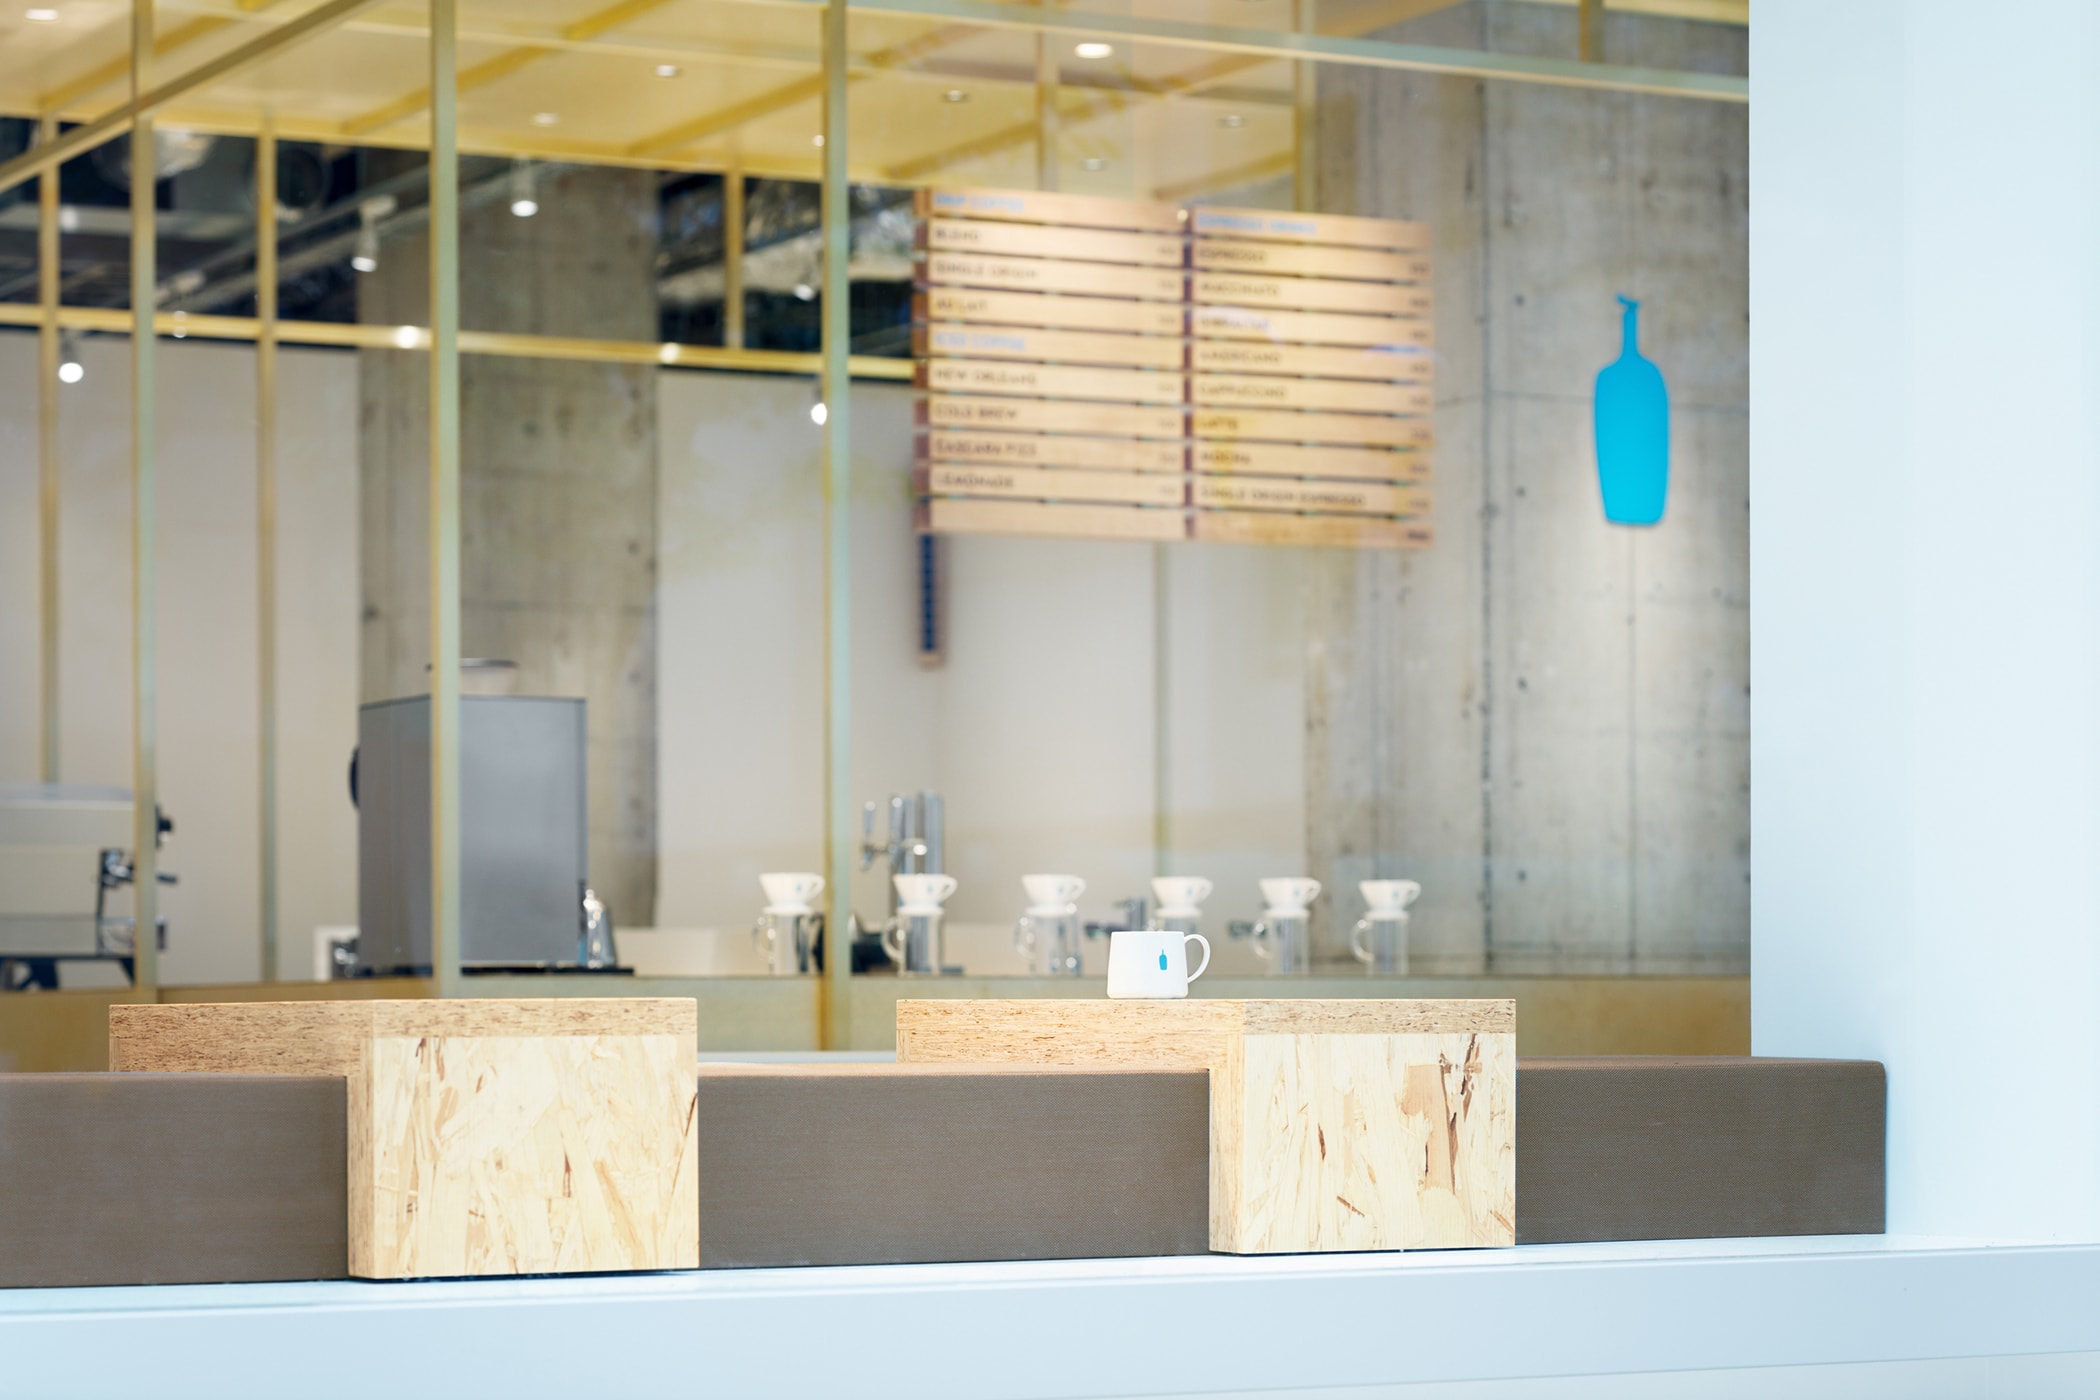 Blue Bottle Coffee Debuts First Chicago Café